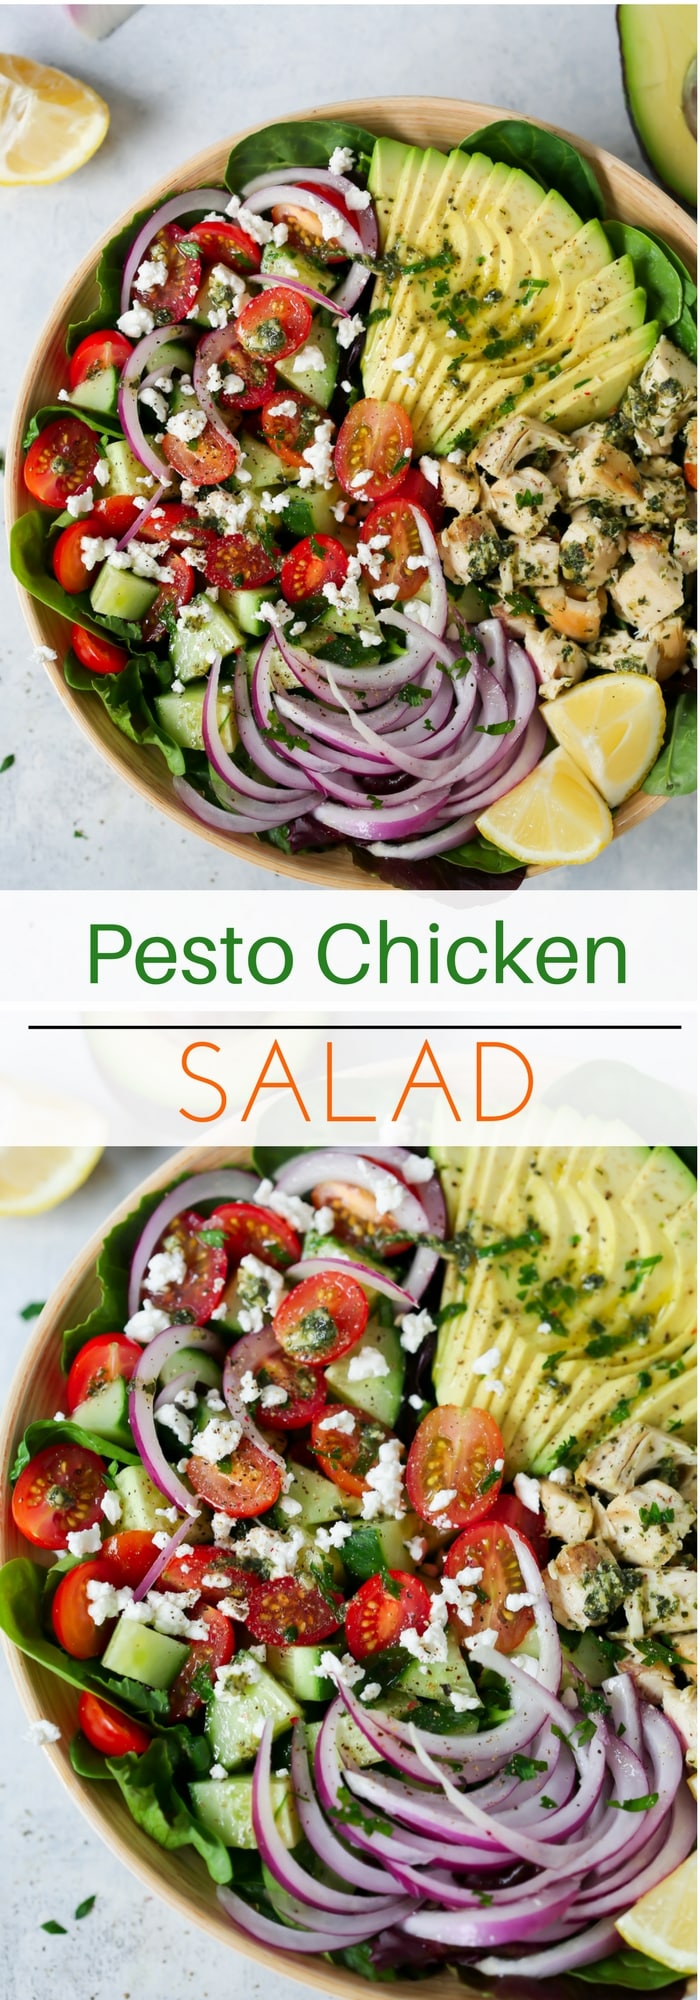 Pesto Chicken Salad - This healthy, easy, filling and super delicious Pesto Chicken Salad recipe is loaded with lettuces, cherry tomatoes, avocado, red onions and flavoured with a light lemon dressing. 